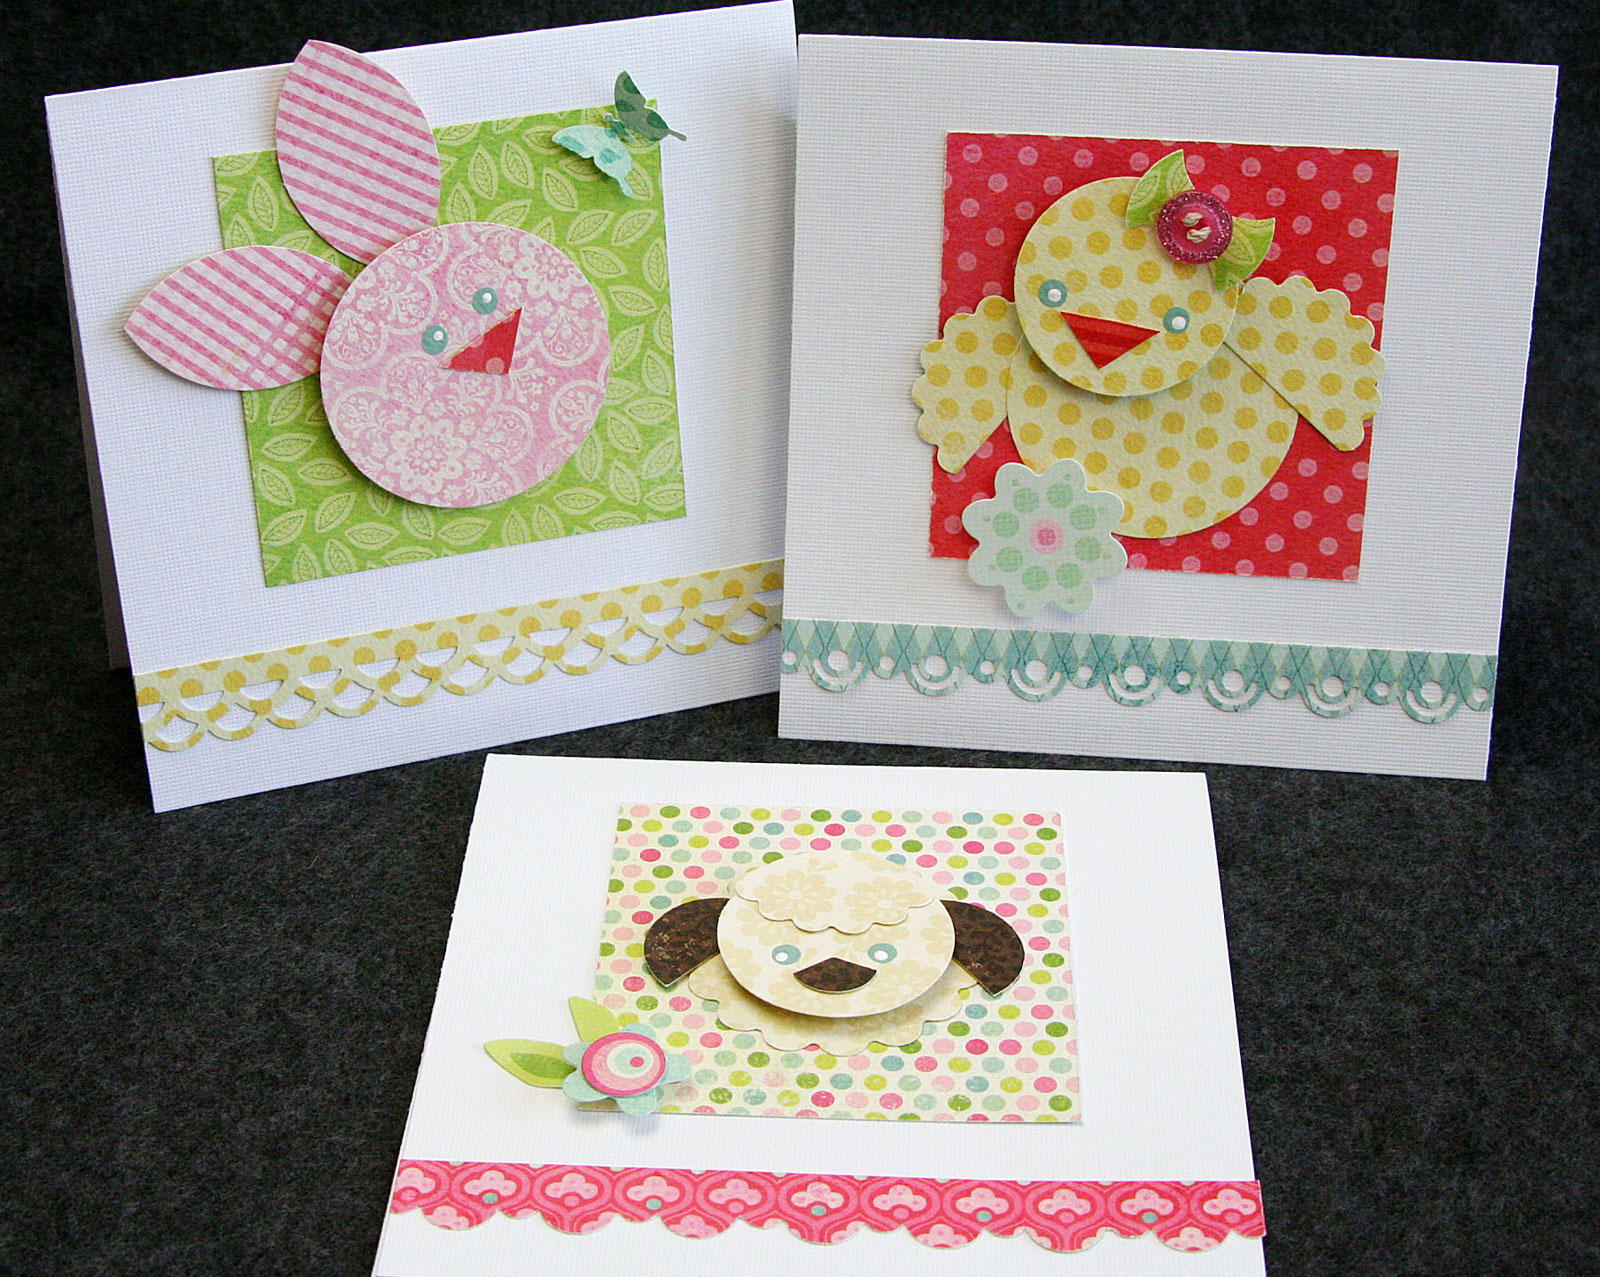 seasonal-card-card-making-templates-and-homemade-easter-cards-with-lace-plus-paper-also-easter-also-ideas-for-making-cards-lovely-and-funny-easter-card-making-ideas-for-saying